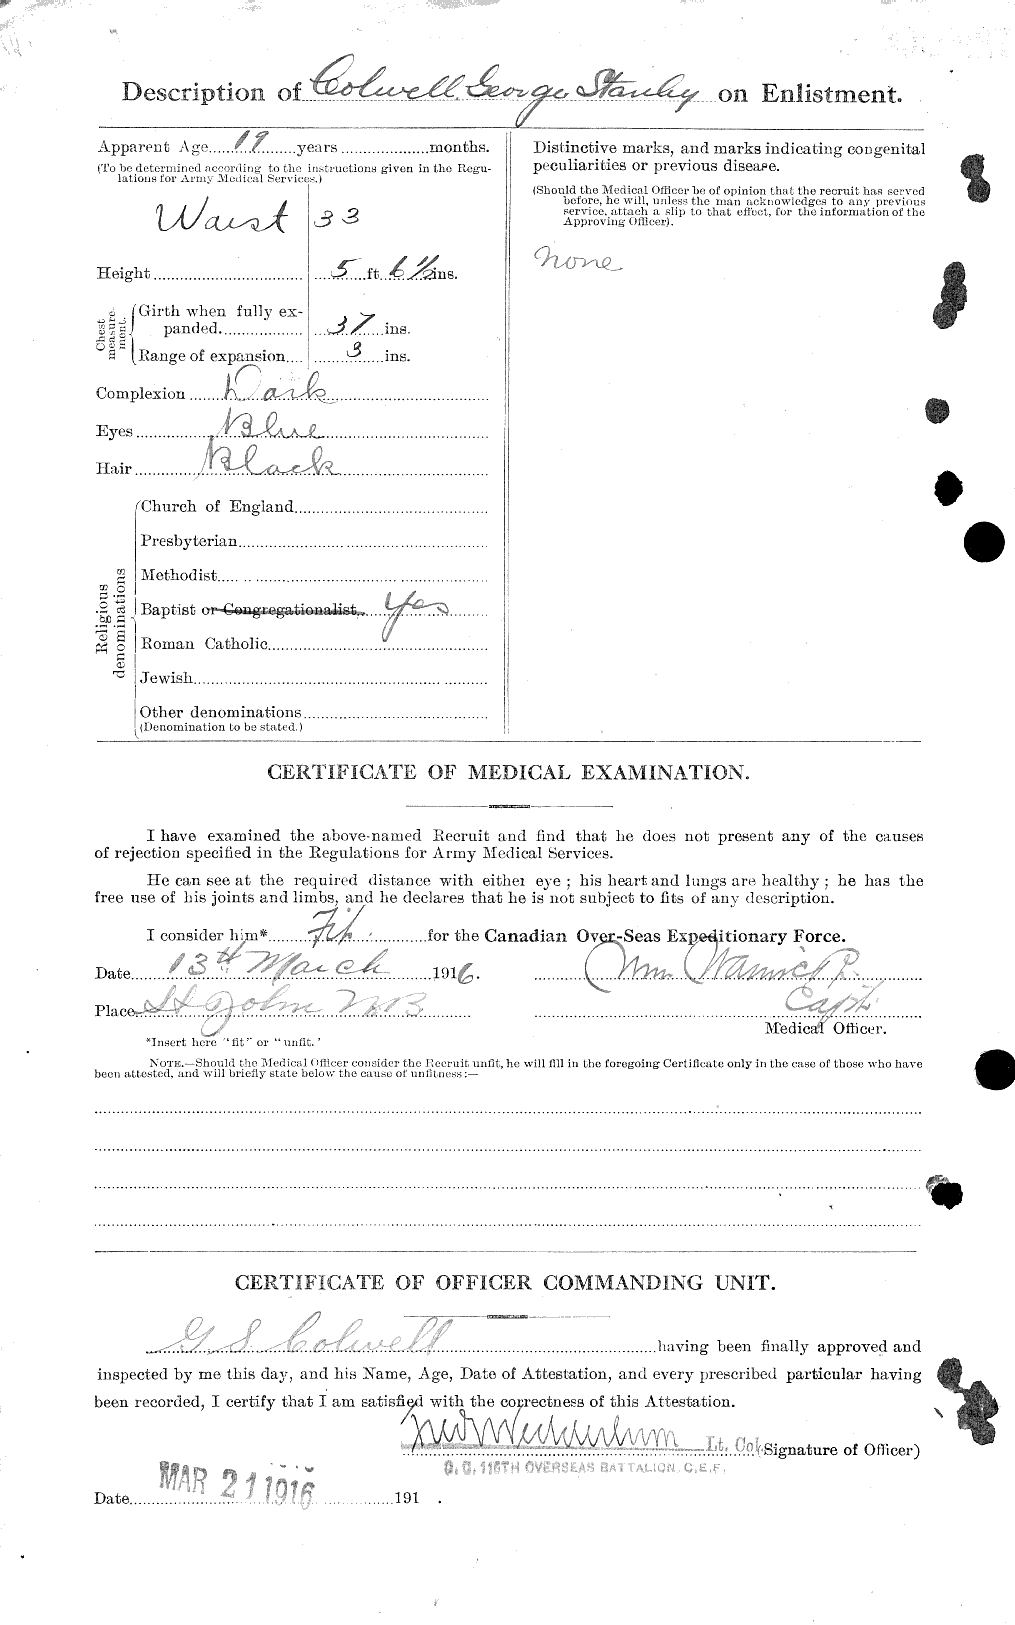 Personnel Records of the First World War - CEF 043835b